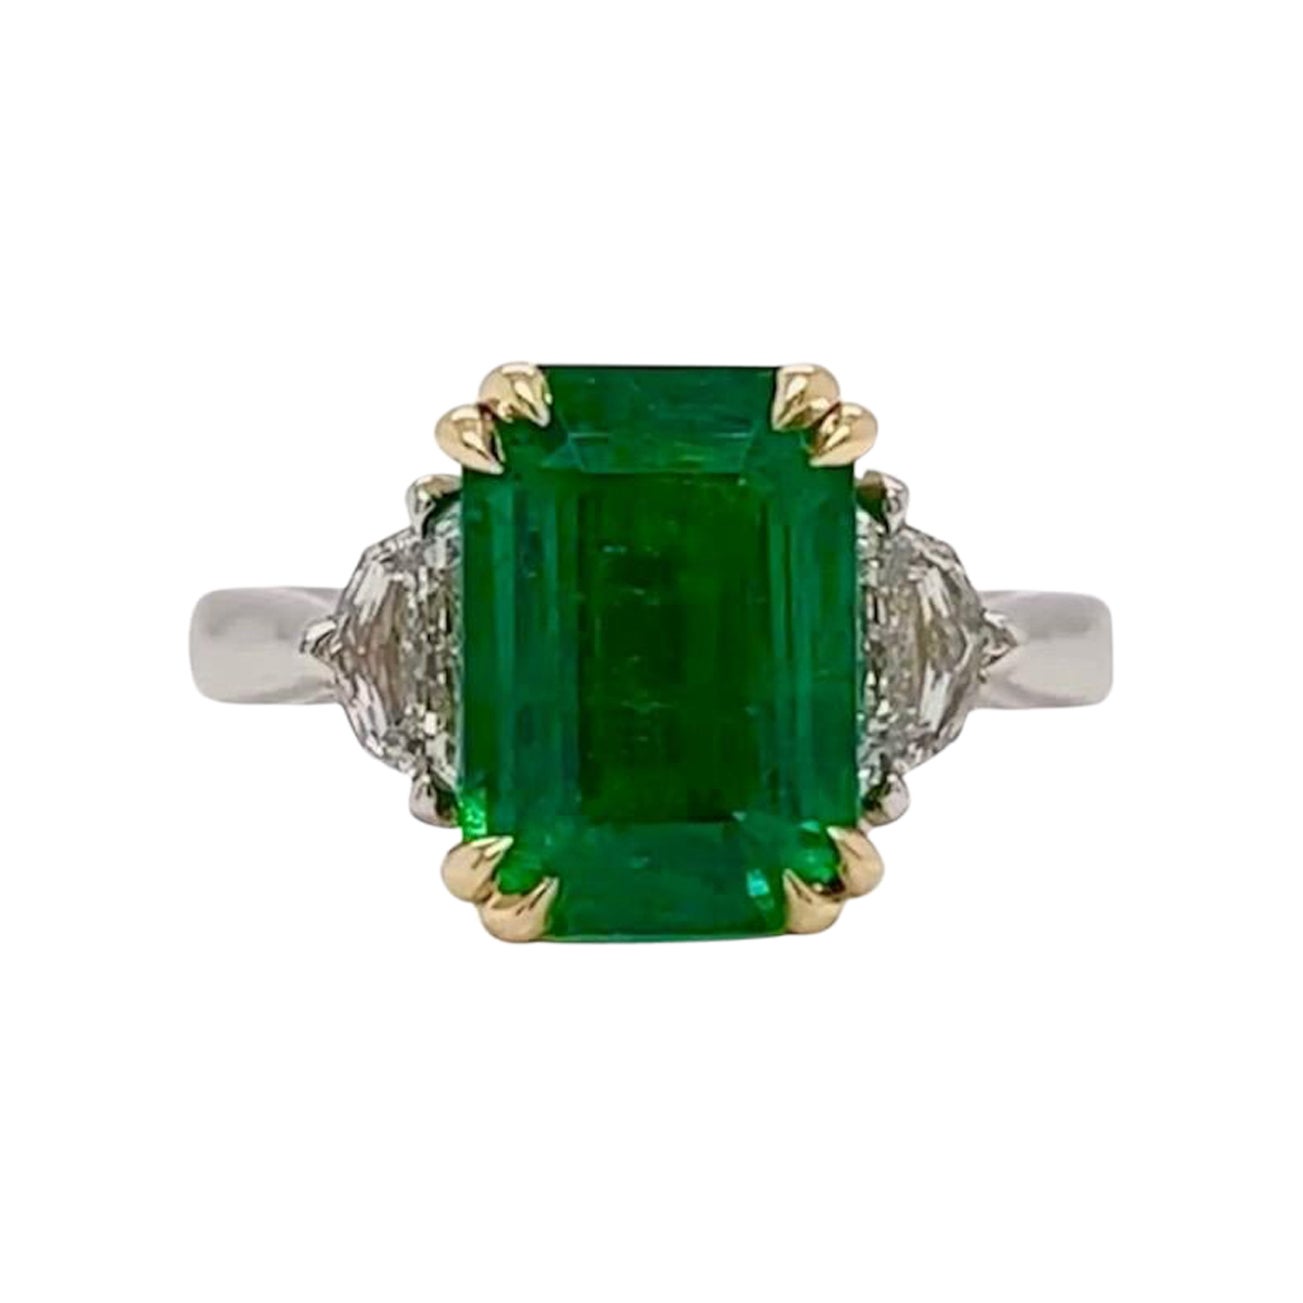 4.29ct gorgeous fine vivid green Emerald with an elegant elongated proportion & 0.53ctw F/G VS Epaulette shaped side stones. 

Set in an expertly crafted Platinum & 18K Yellow Comfort fit setting. 

Ring Size 6.5